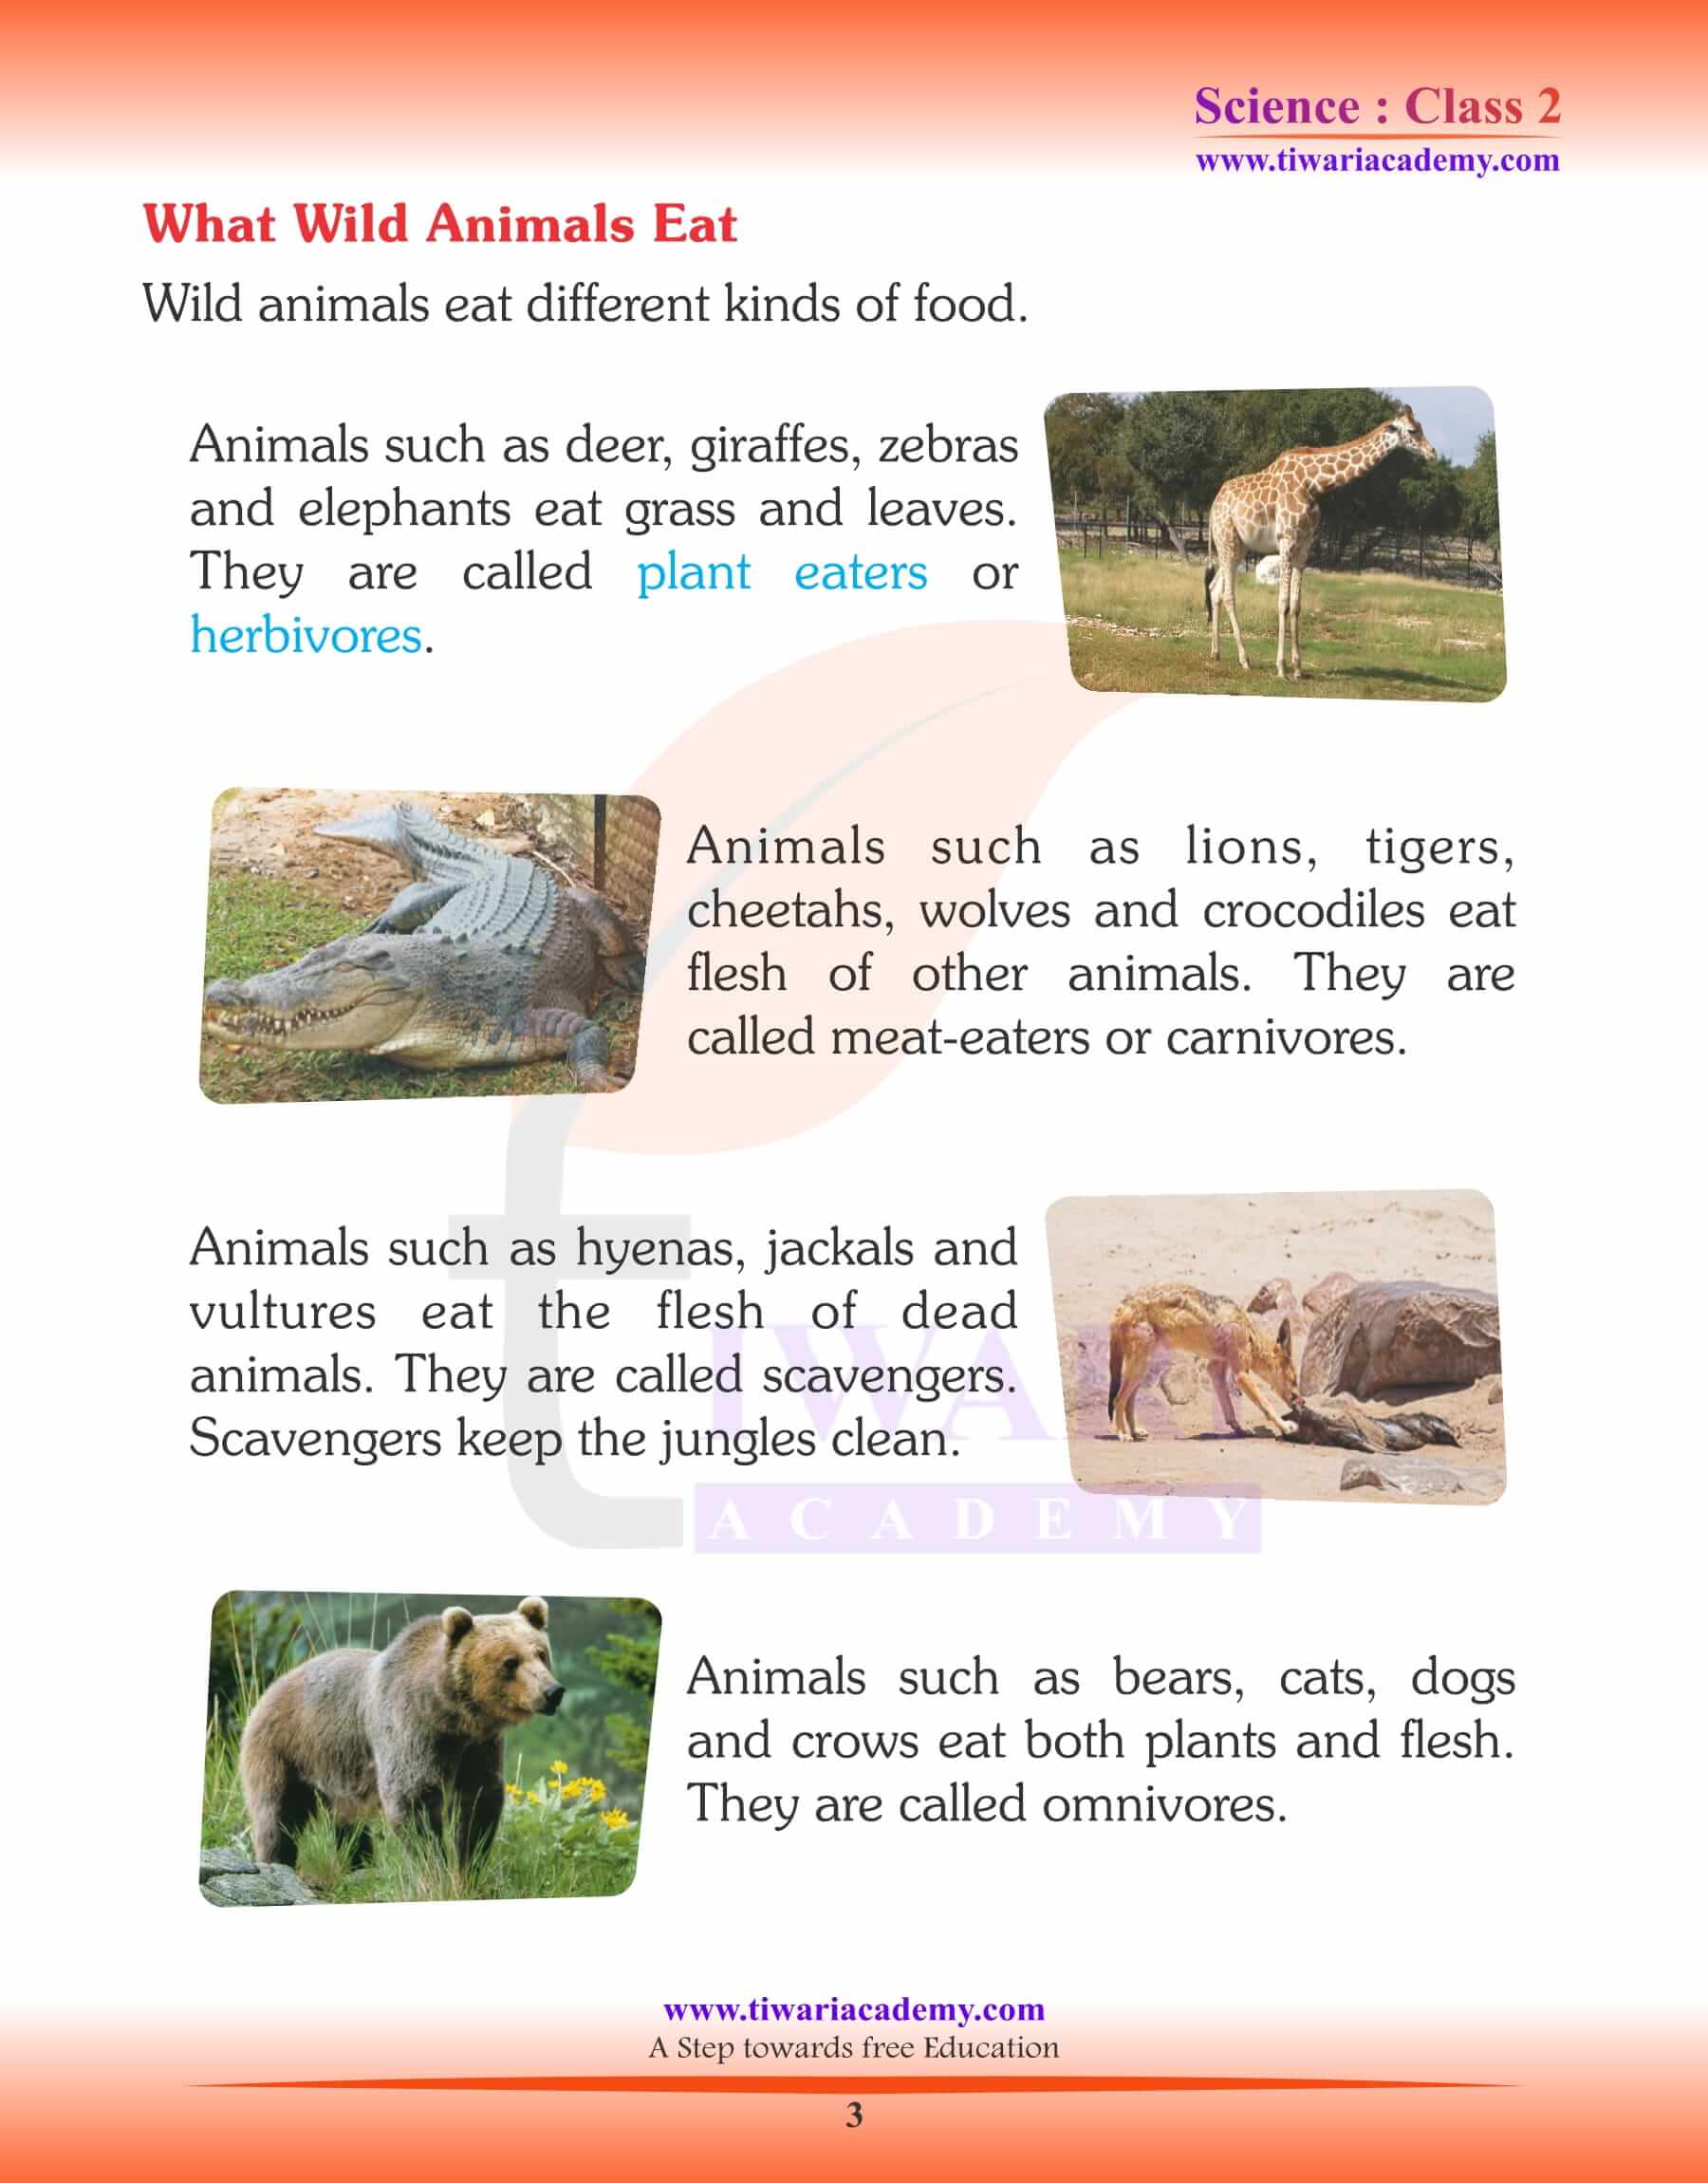 NCERT Solutions for Class 2 Science Chapter 4 Wild Animals